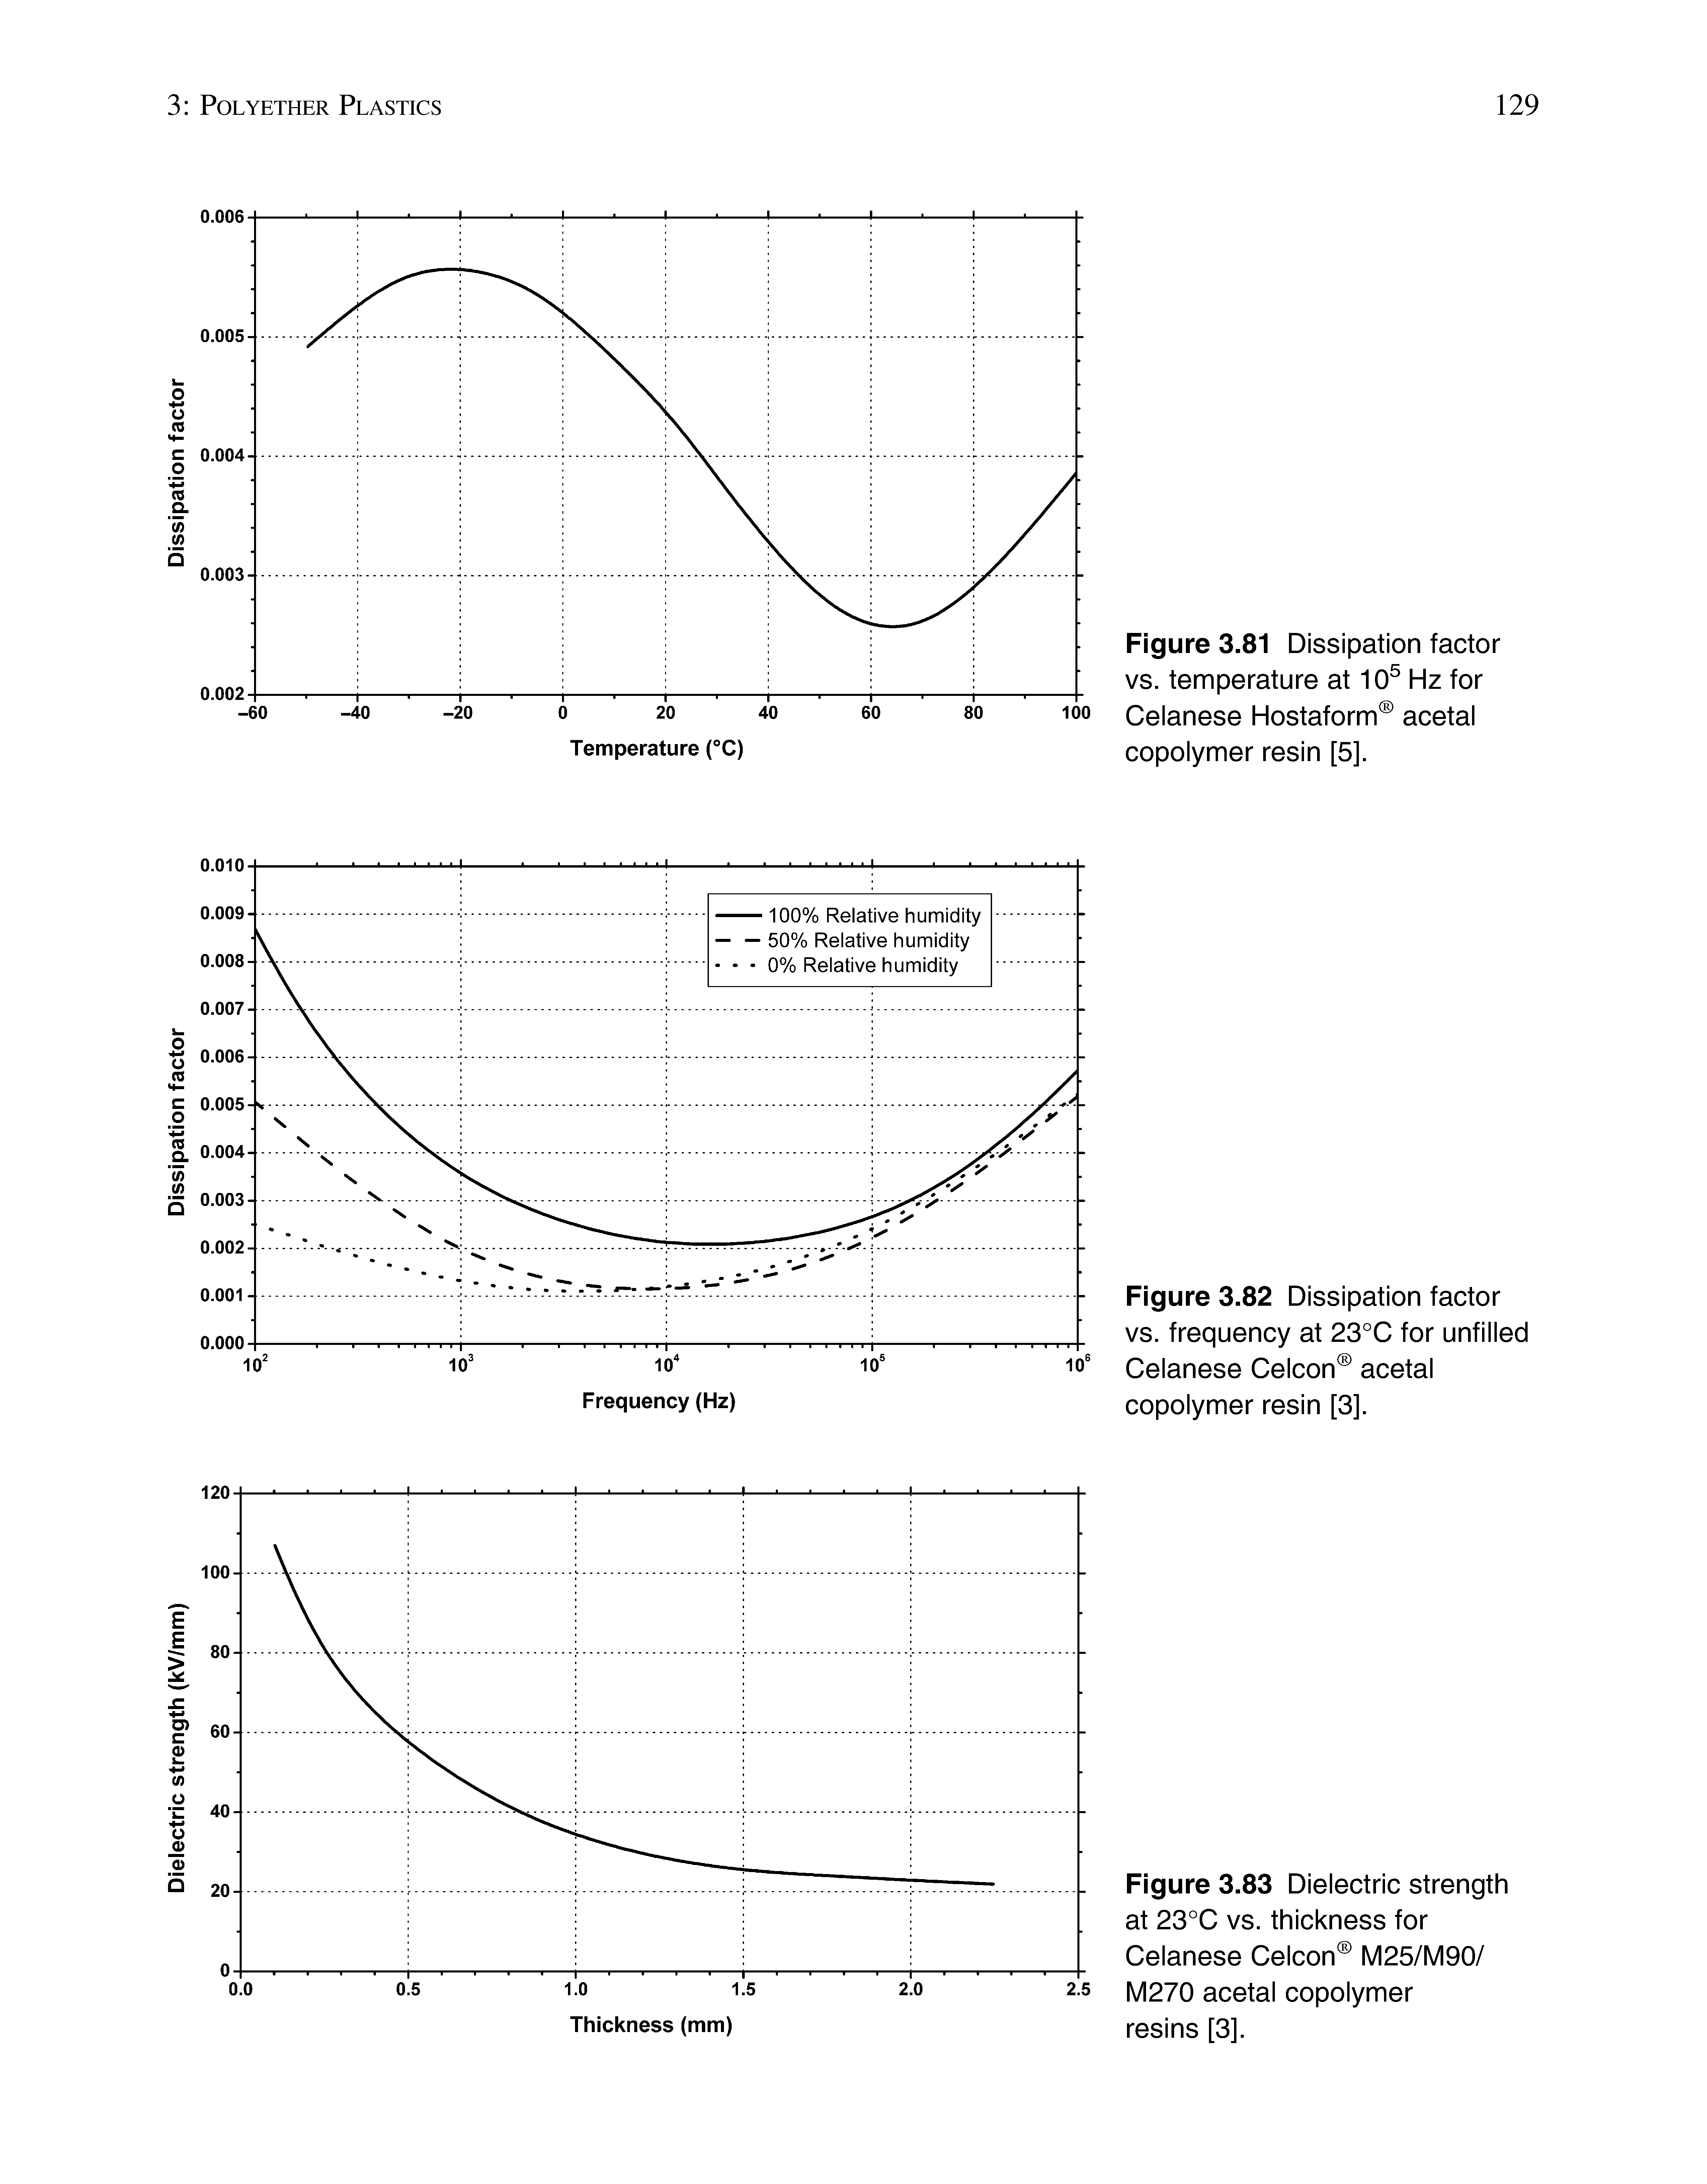 Figure 3.82 Dissipation factor vs. frequency at 23°C for unfilled Celanese Celcon acetal copolymer resin [3].